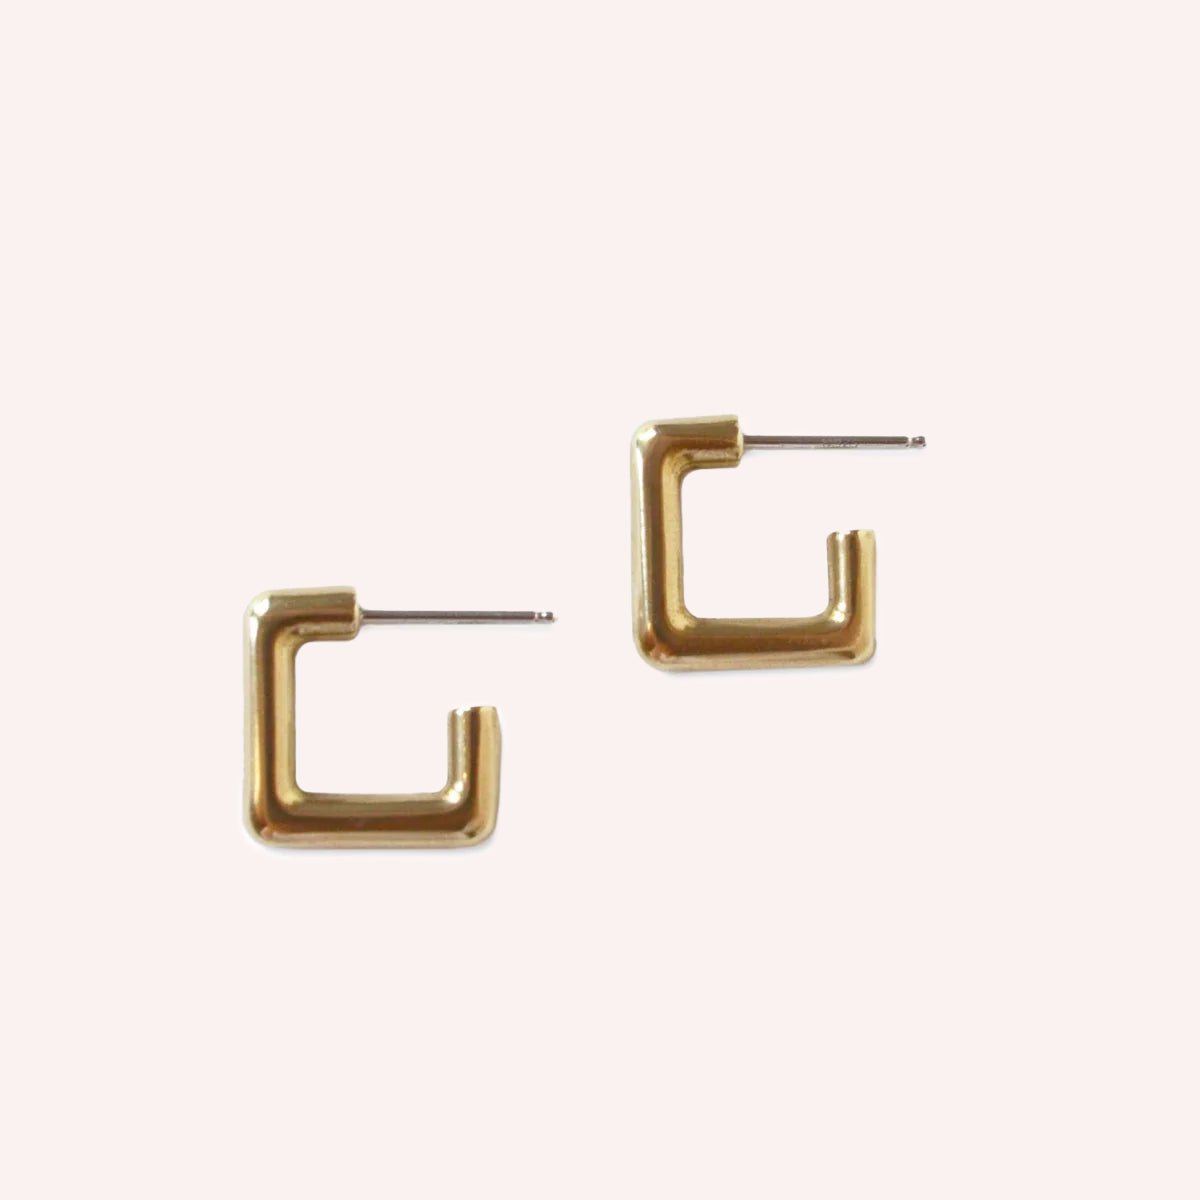 A smooth gold tone square hoop earring with sterling silver earrings posts. The Courtyard Hoops in Brass are designed and handcrafted by Natalie Joy in Portland, Oregon.